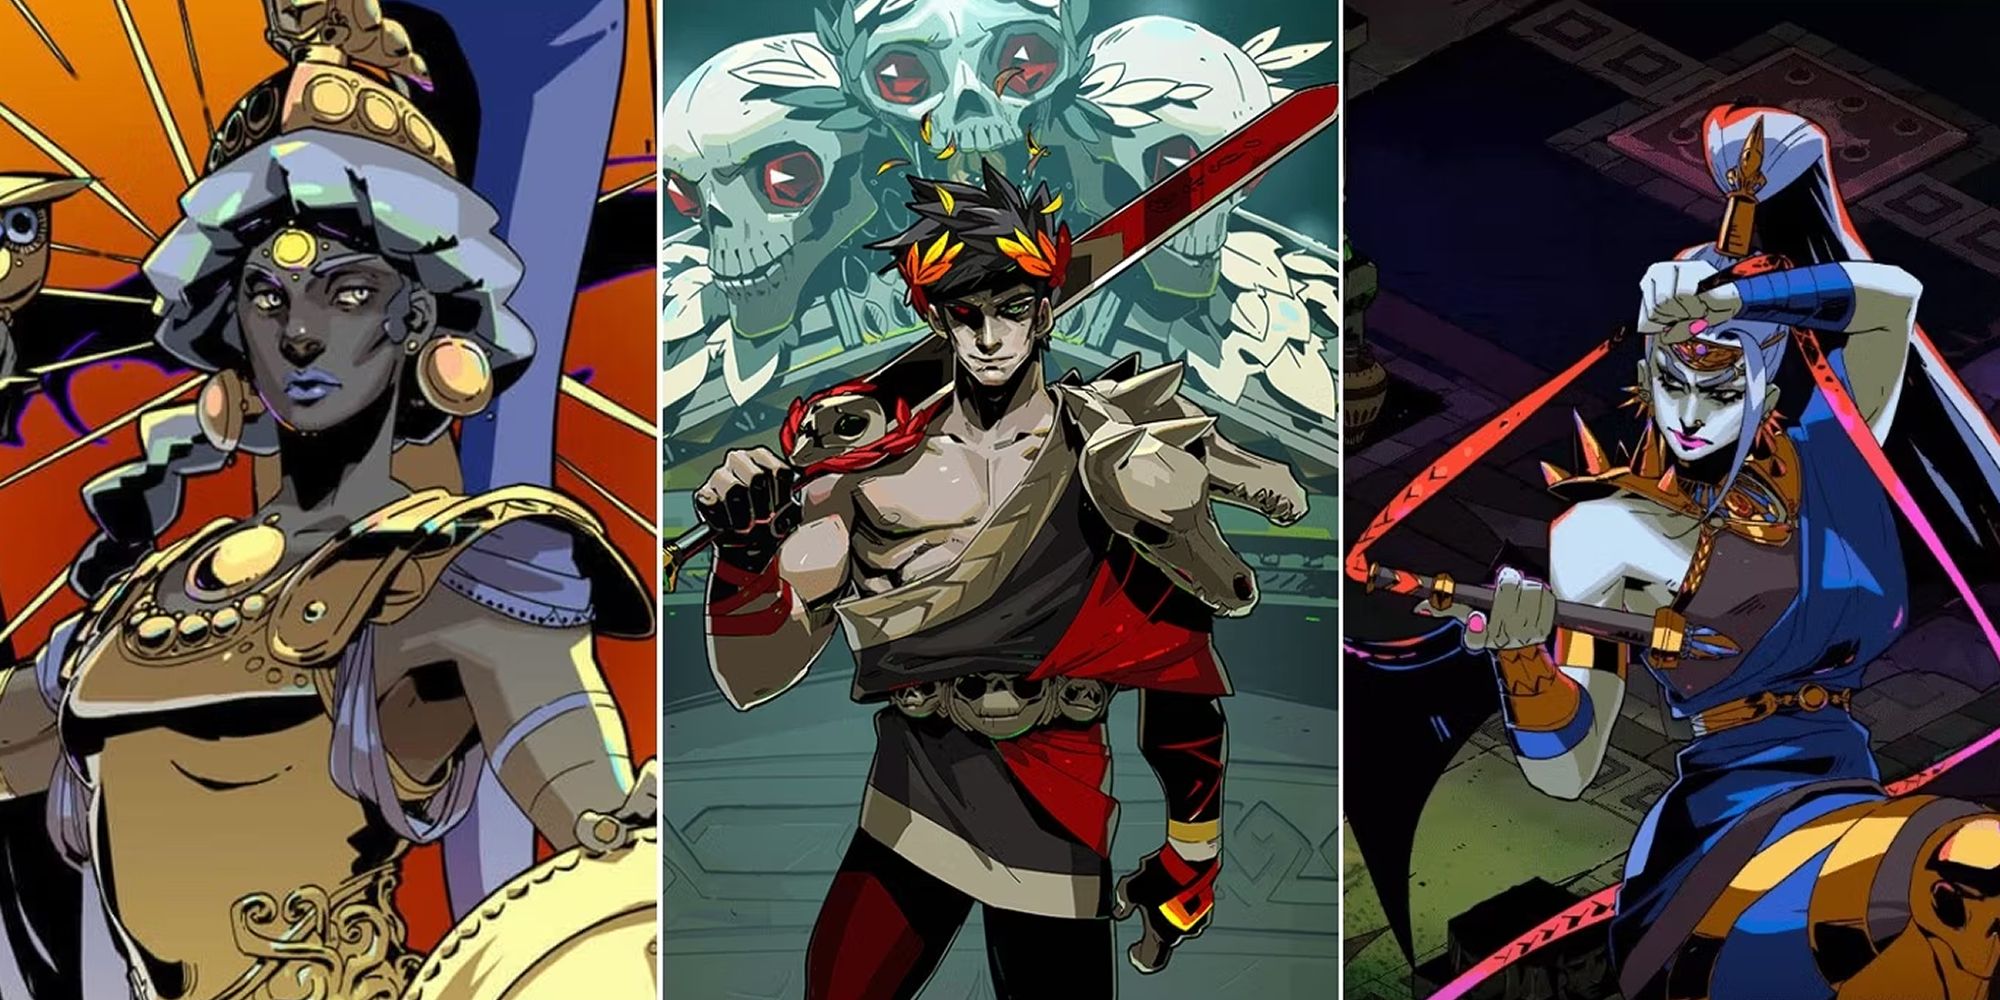 Hades A Split Image Of Athena, Zagreus, And The Furies